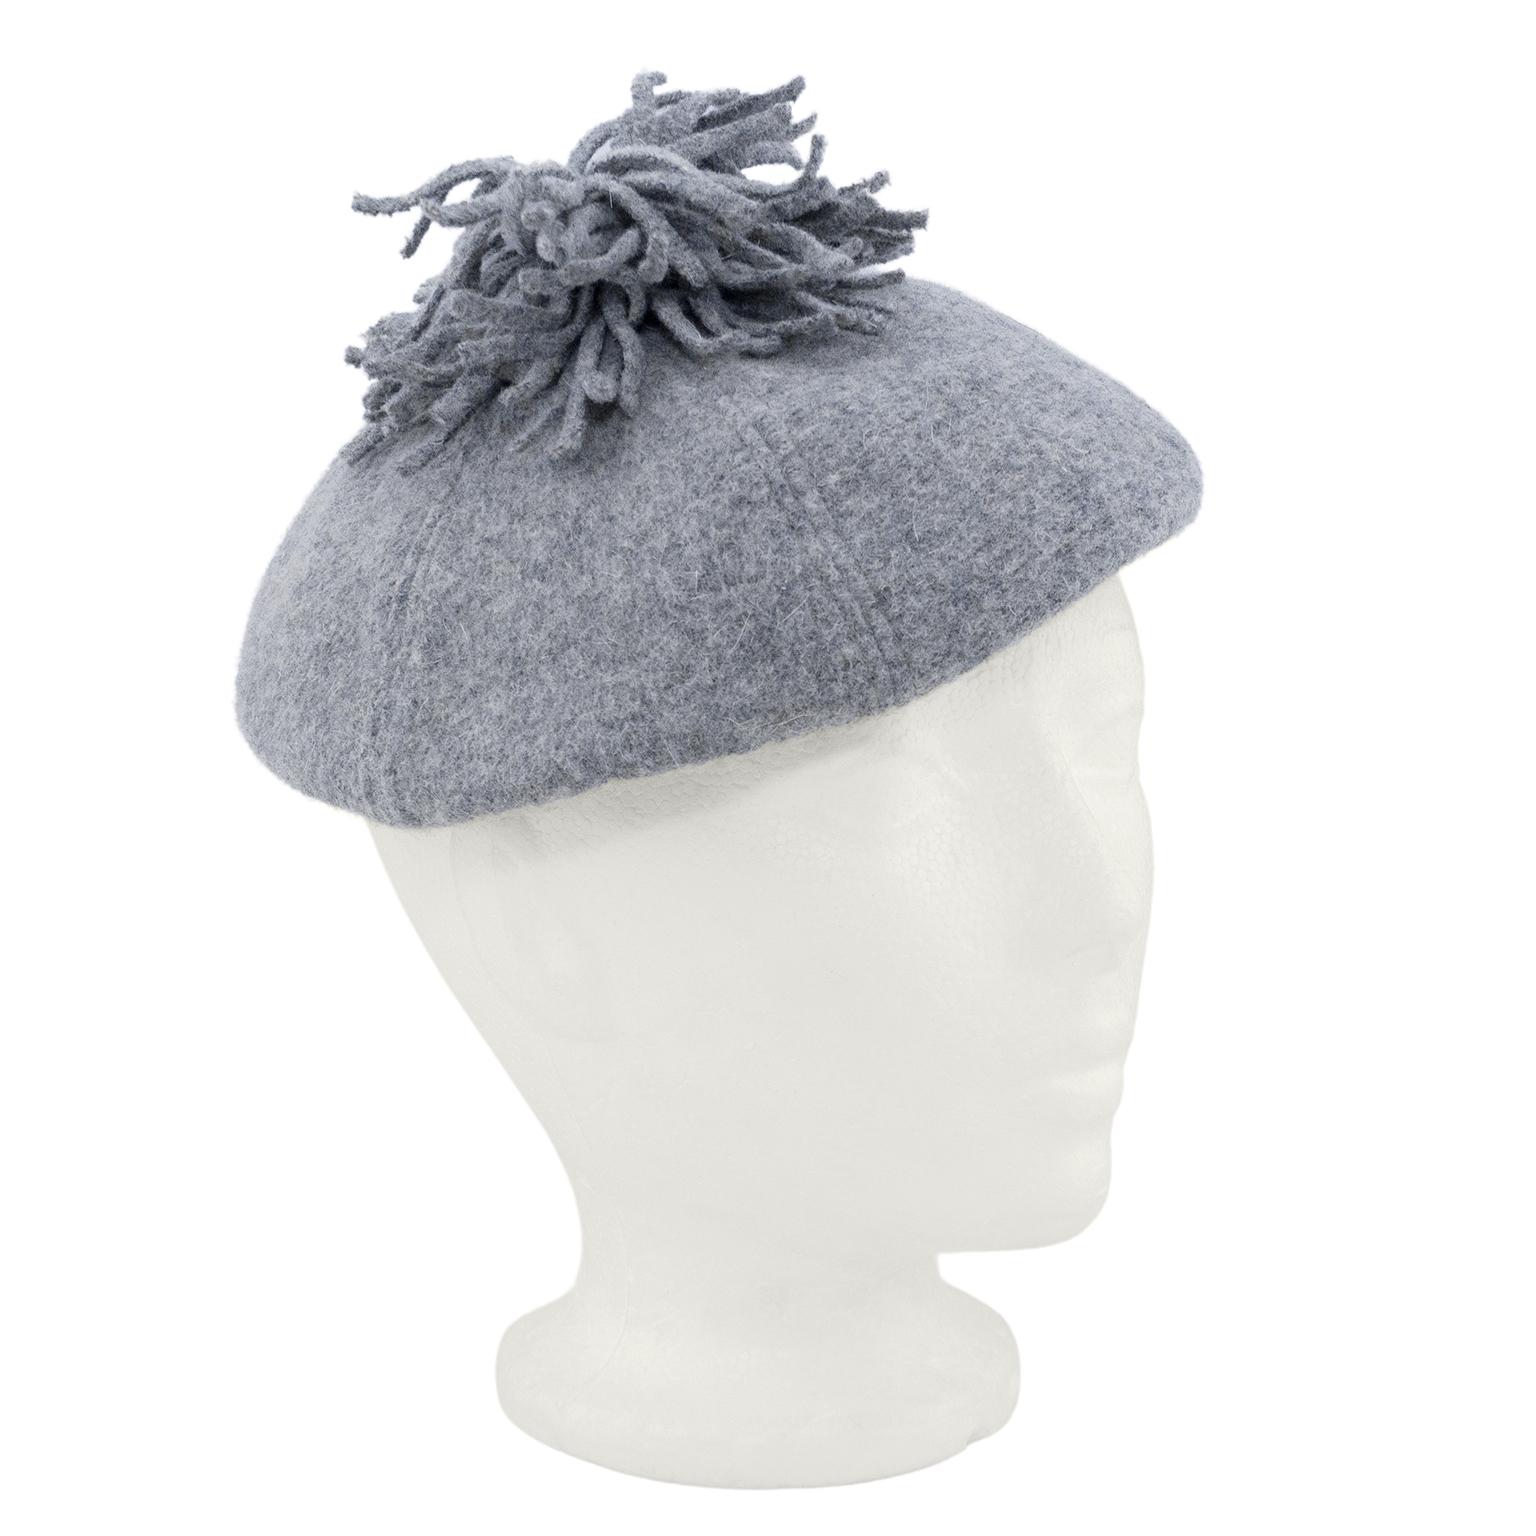 Adorable 1950s Christian Dior beret. Grey wool with large saucy fringe pom pom. Cream silk interior with grey grosgrain trim. Fits a small-med head. Excellent vintage condition. License Chapeaux label. 